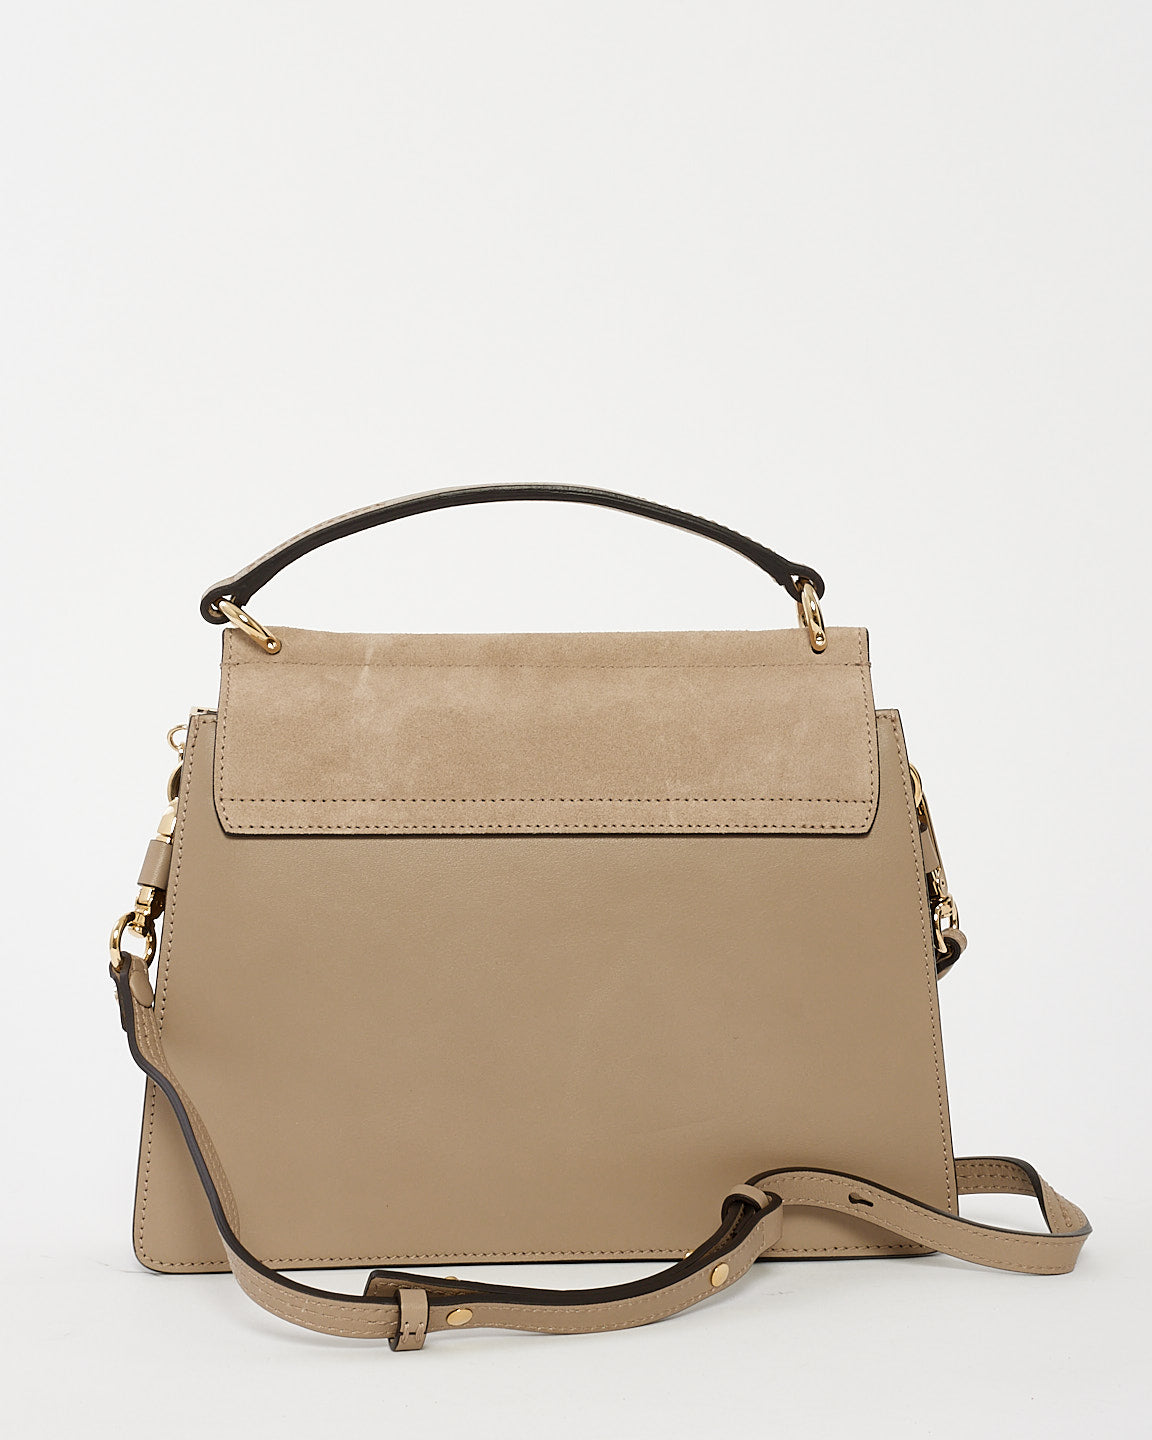 Chloé Taupe Leather and Suede Small Faye Shoulder Bag